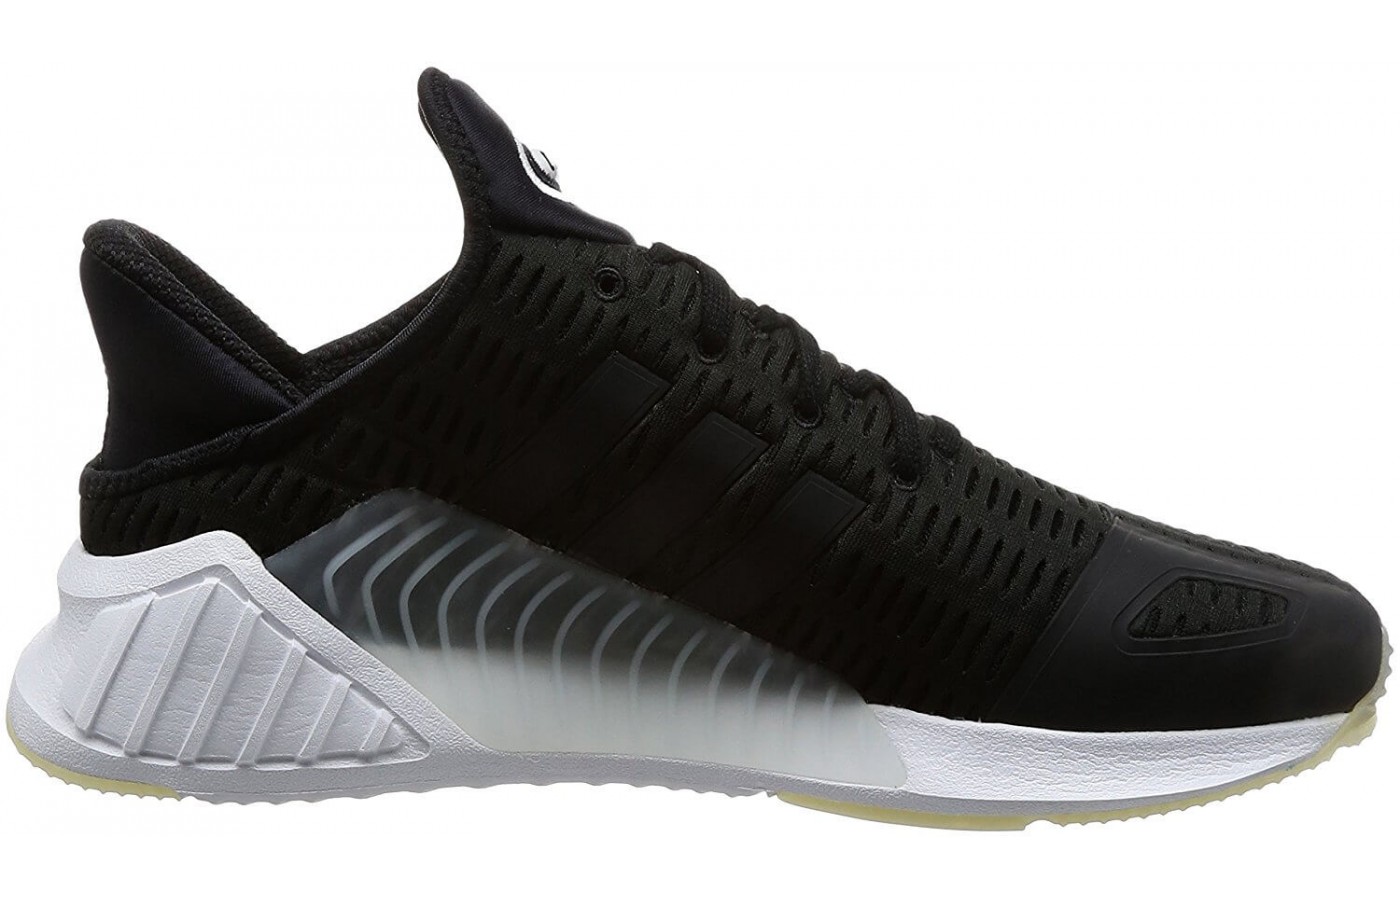 The ClimaCool 02.17 is a stylish shoe